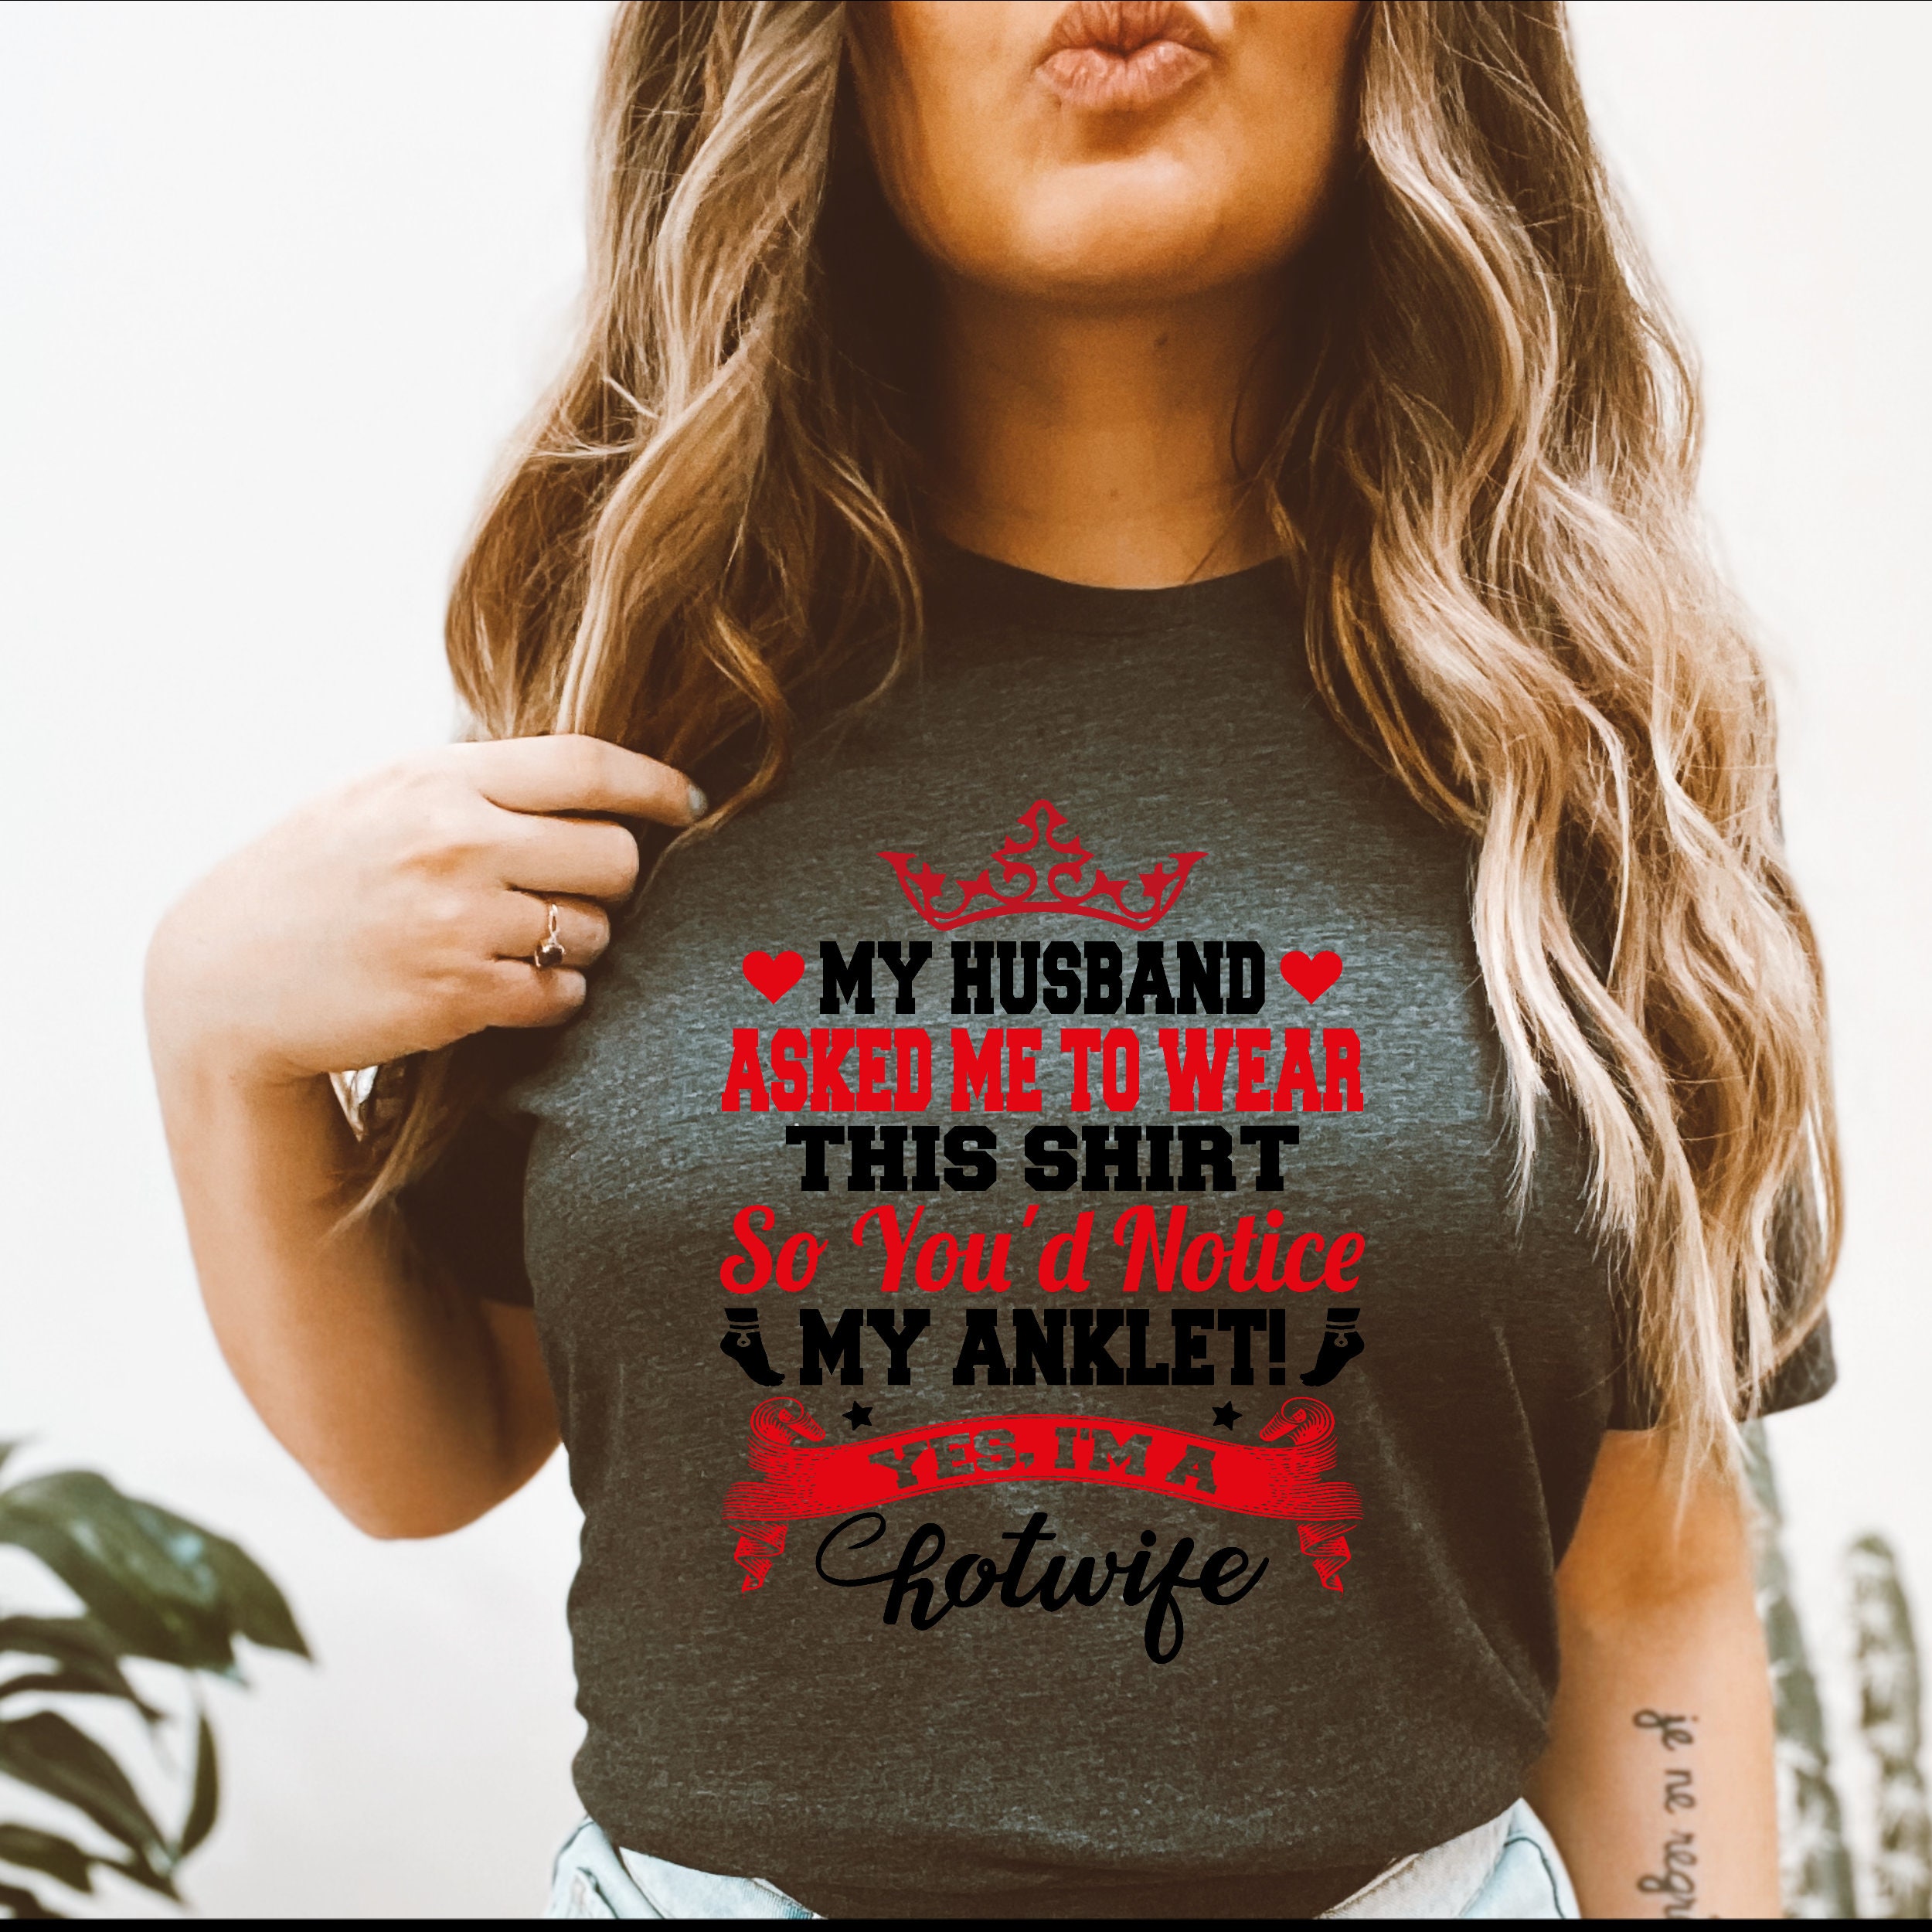 Hotwife T-shirt/sexy Gifts for Him/wife